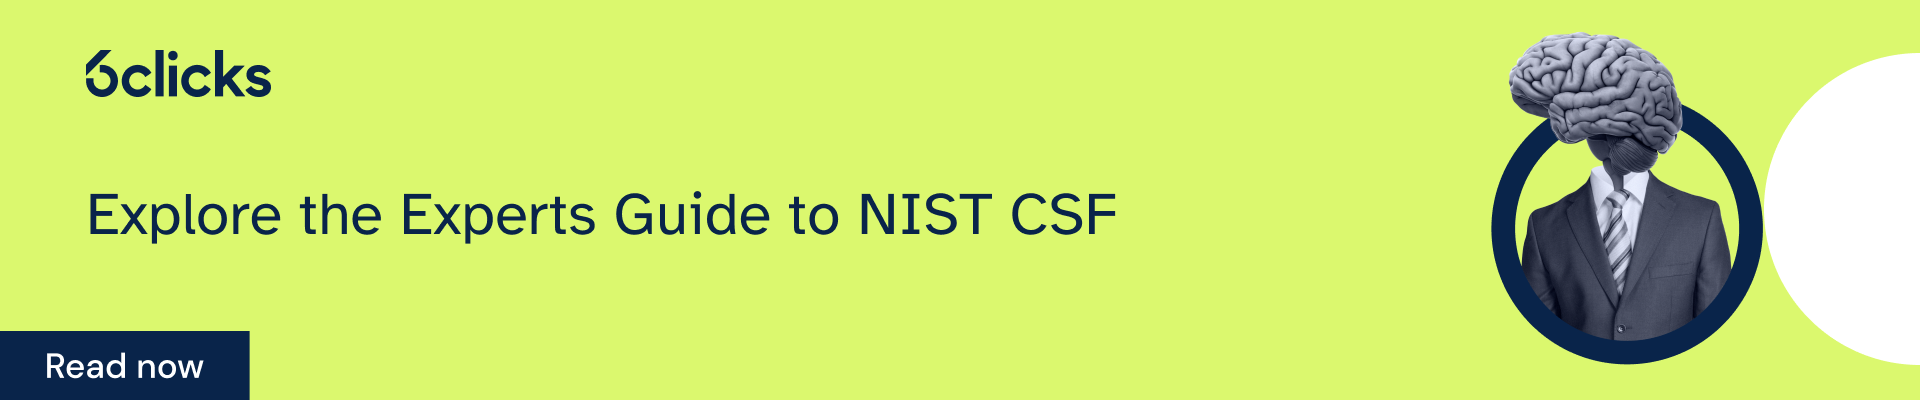 Experts Guide to NIST CSF